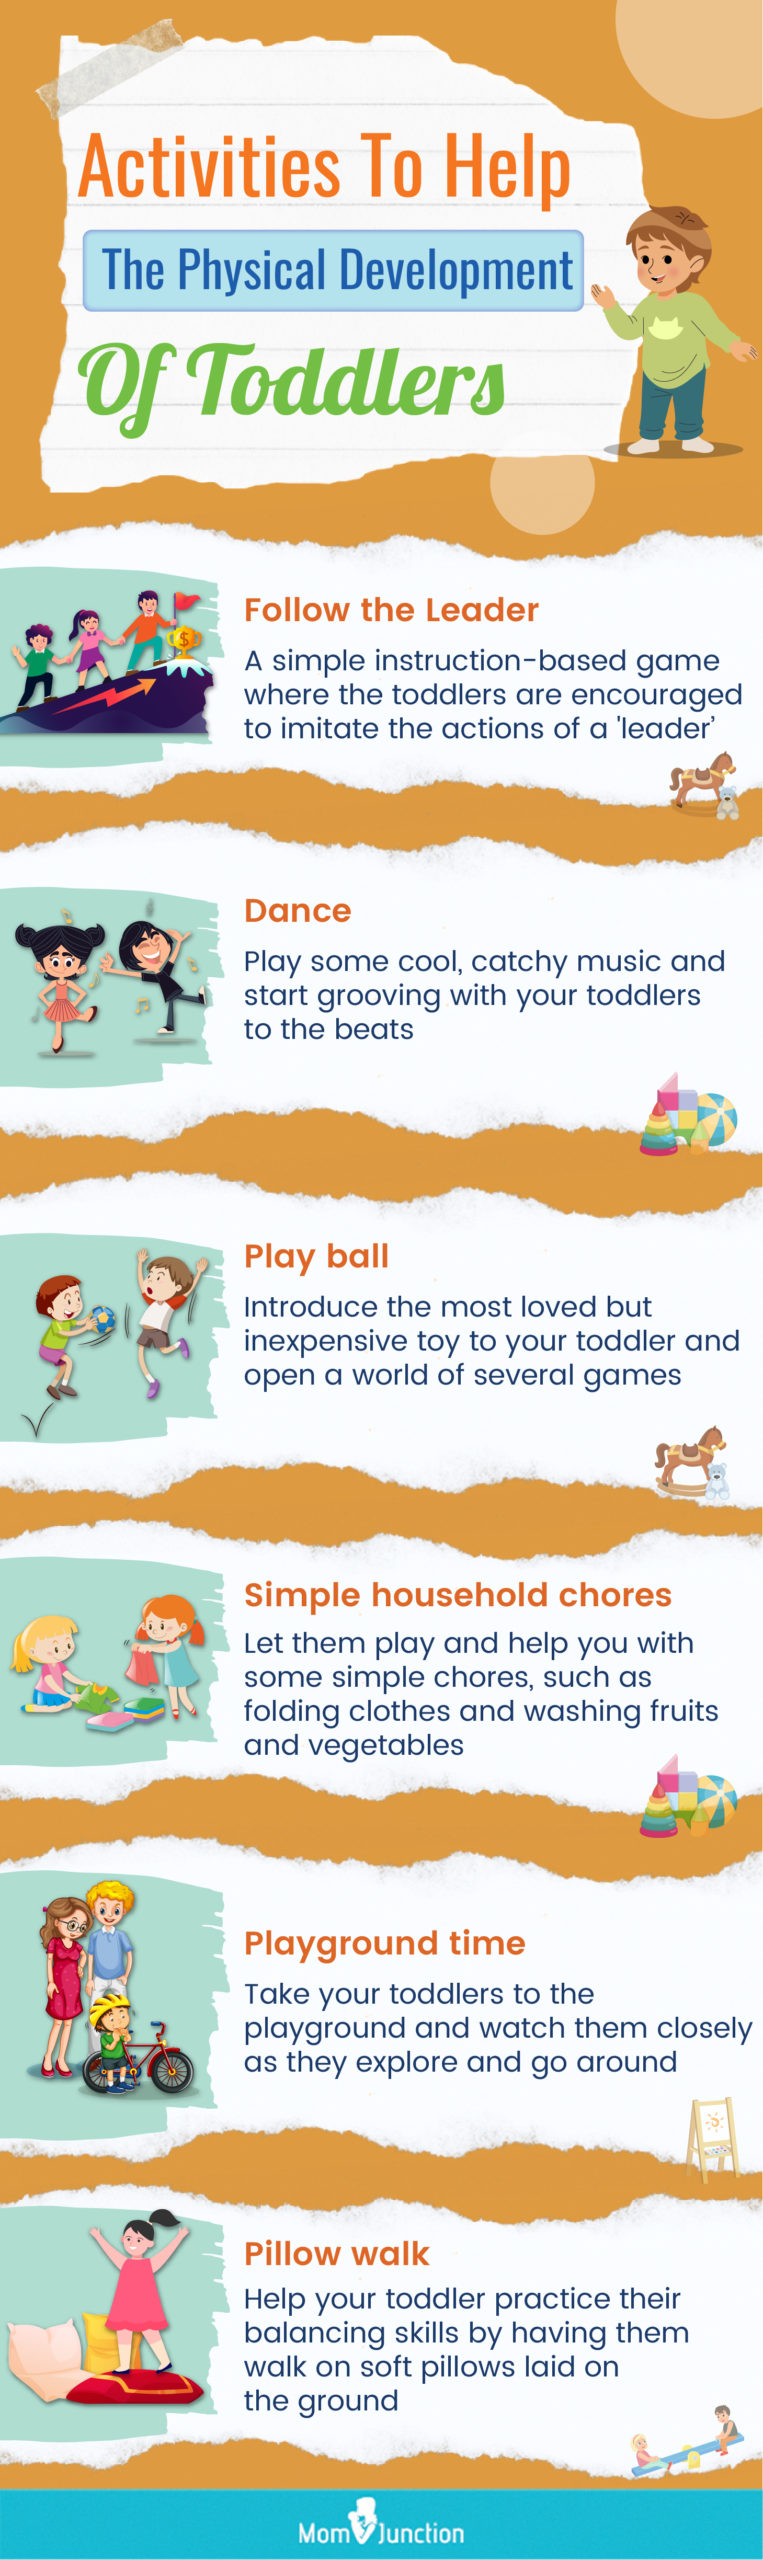 activities to help the physical development of toddlers (infographic)